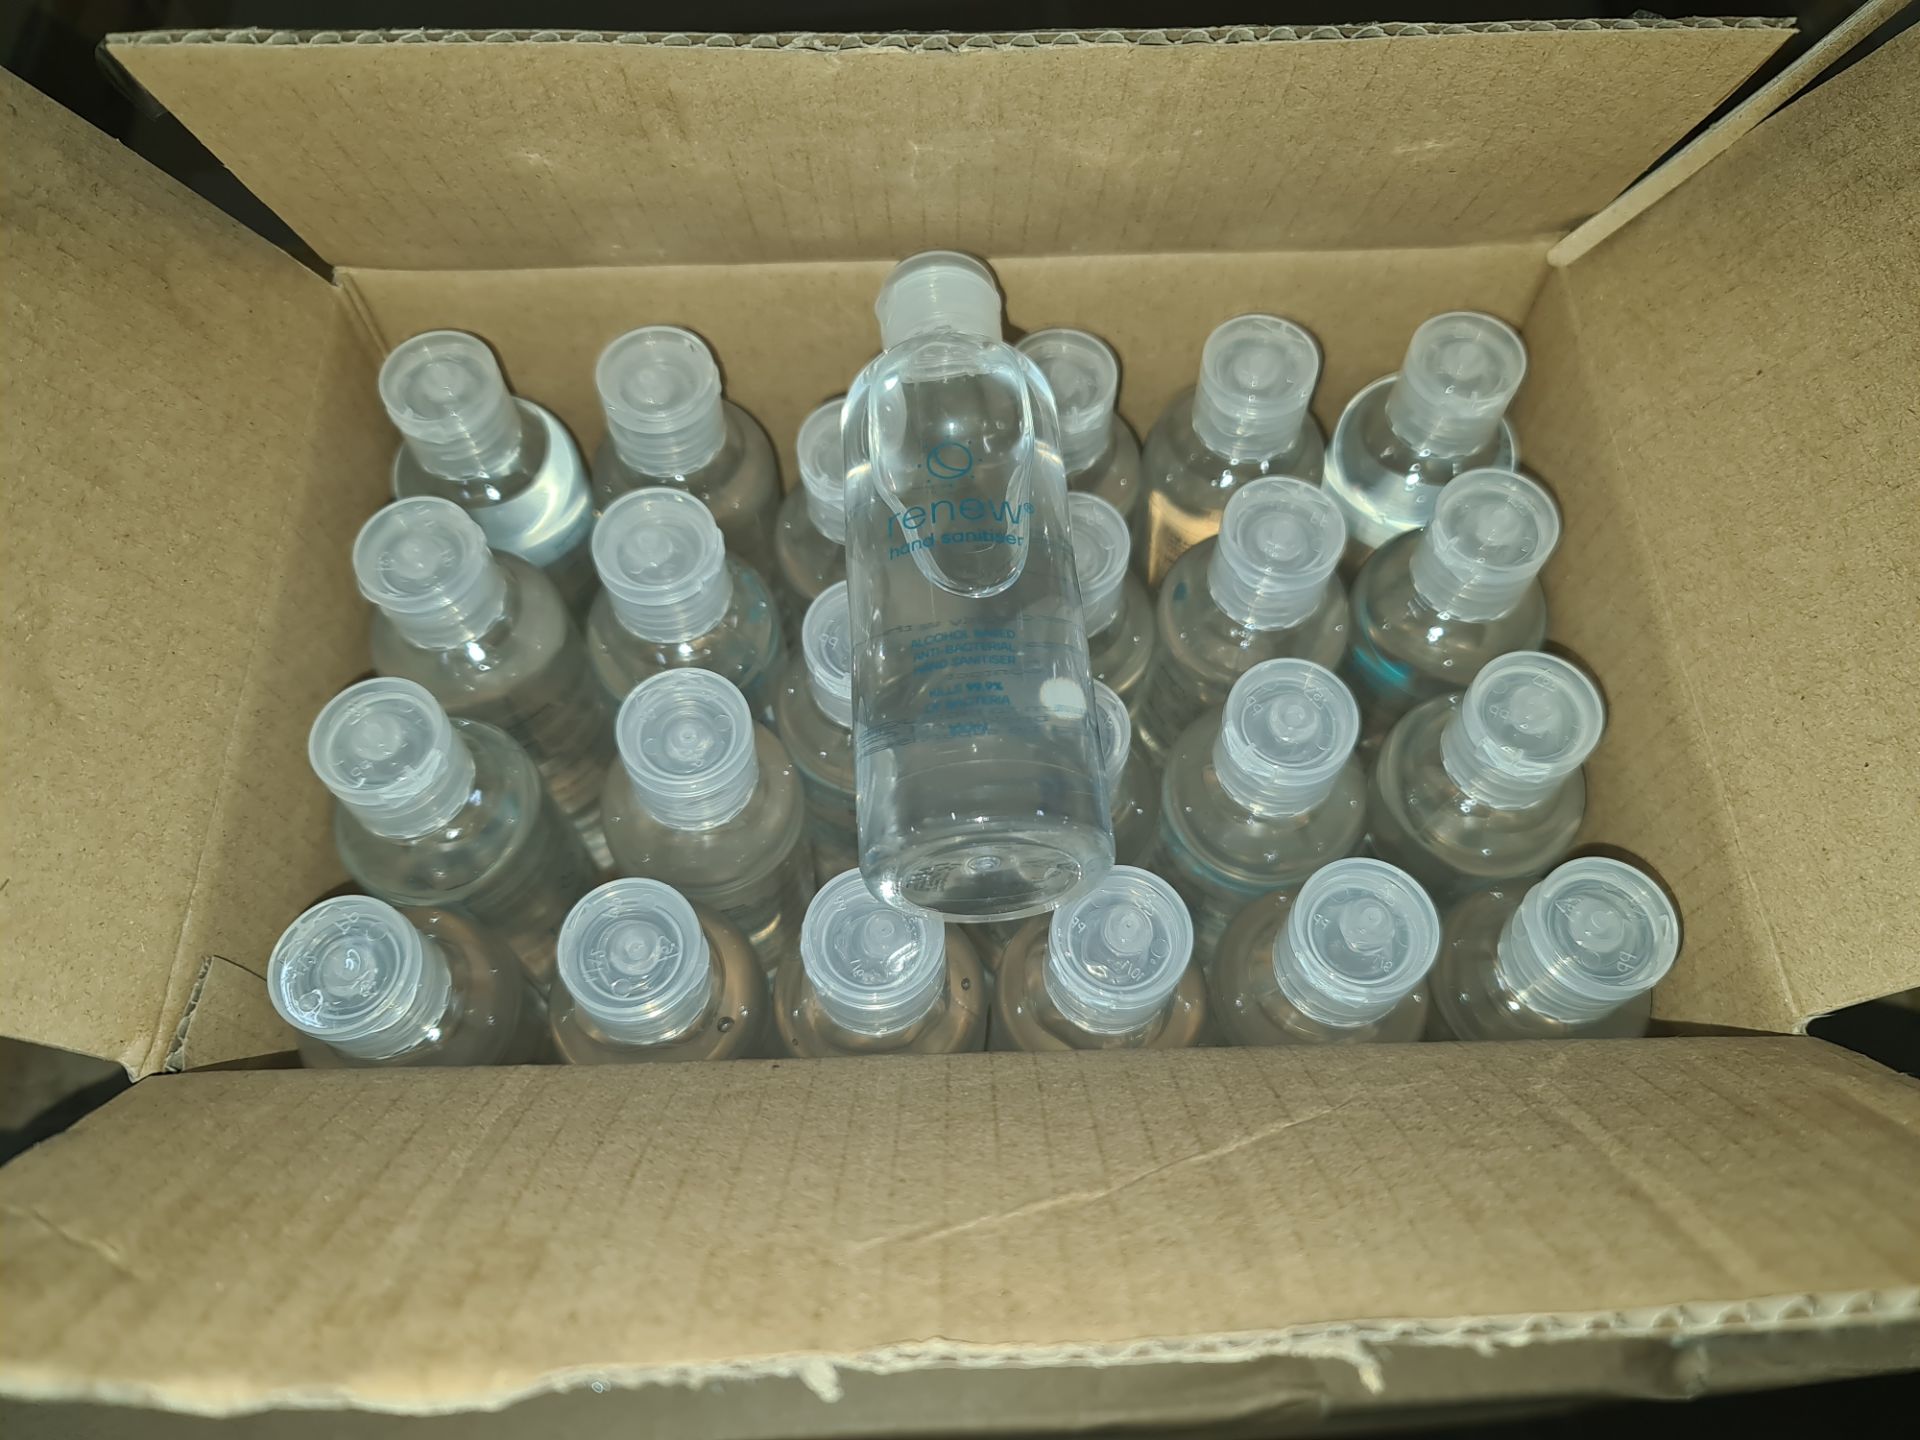 3 boxes containing a total of 432 travel size bottles of alcohol based hand sanitiser. Each bottle i